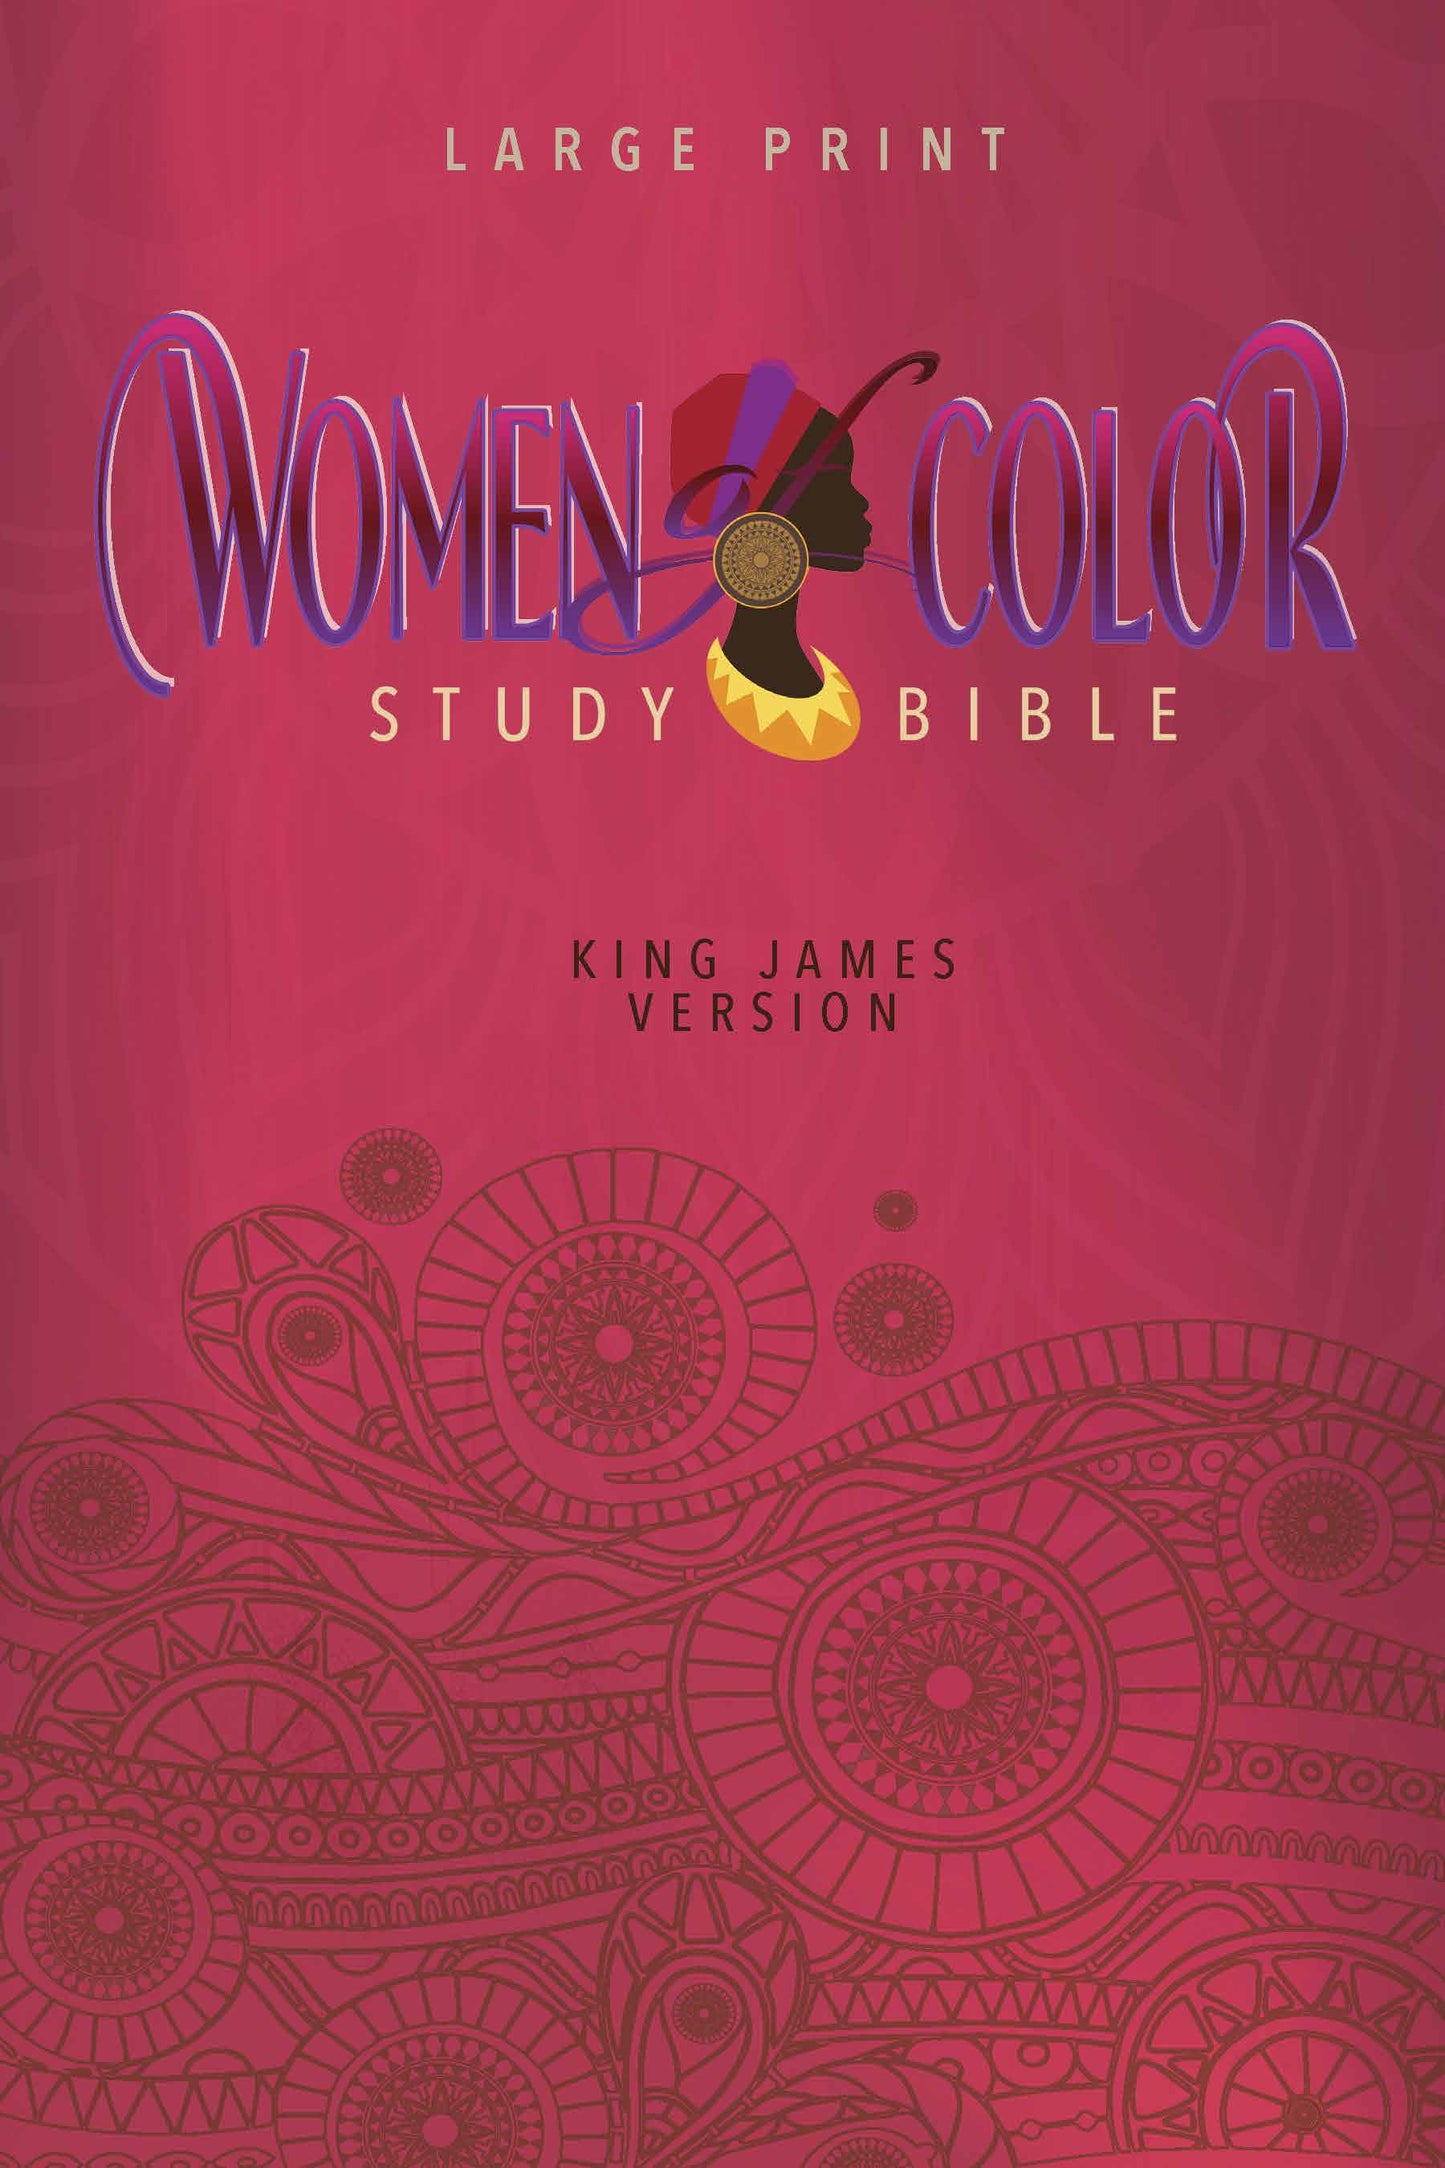 Women of Color Study Bible - Hardcover